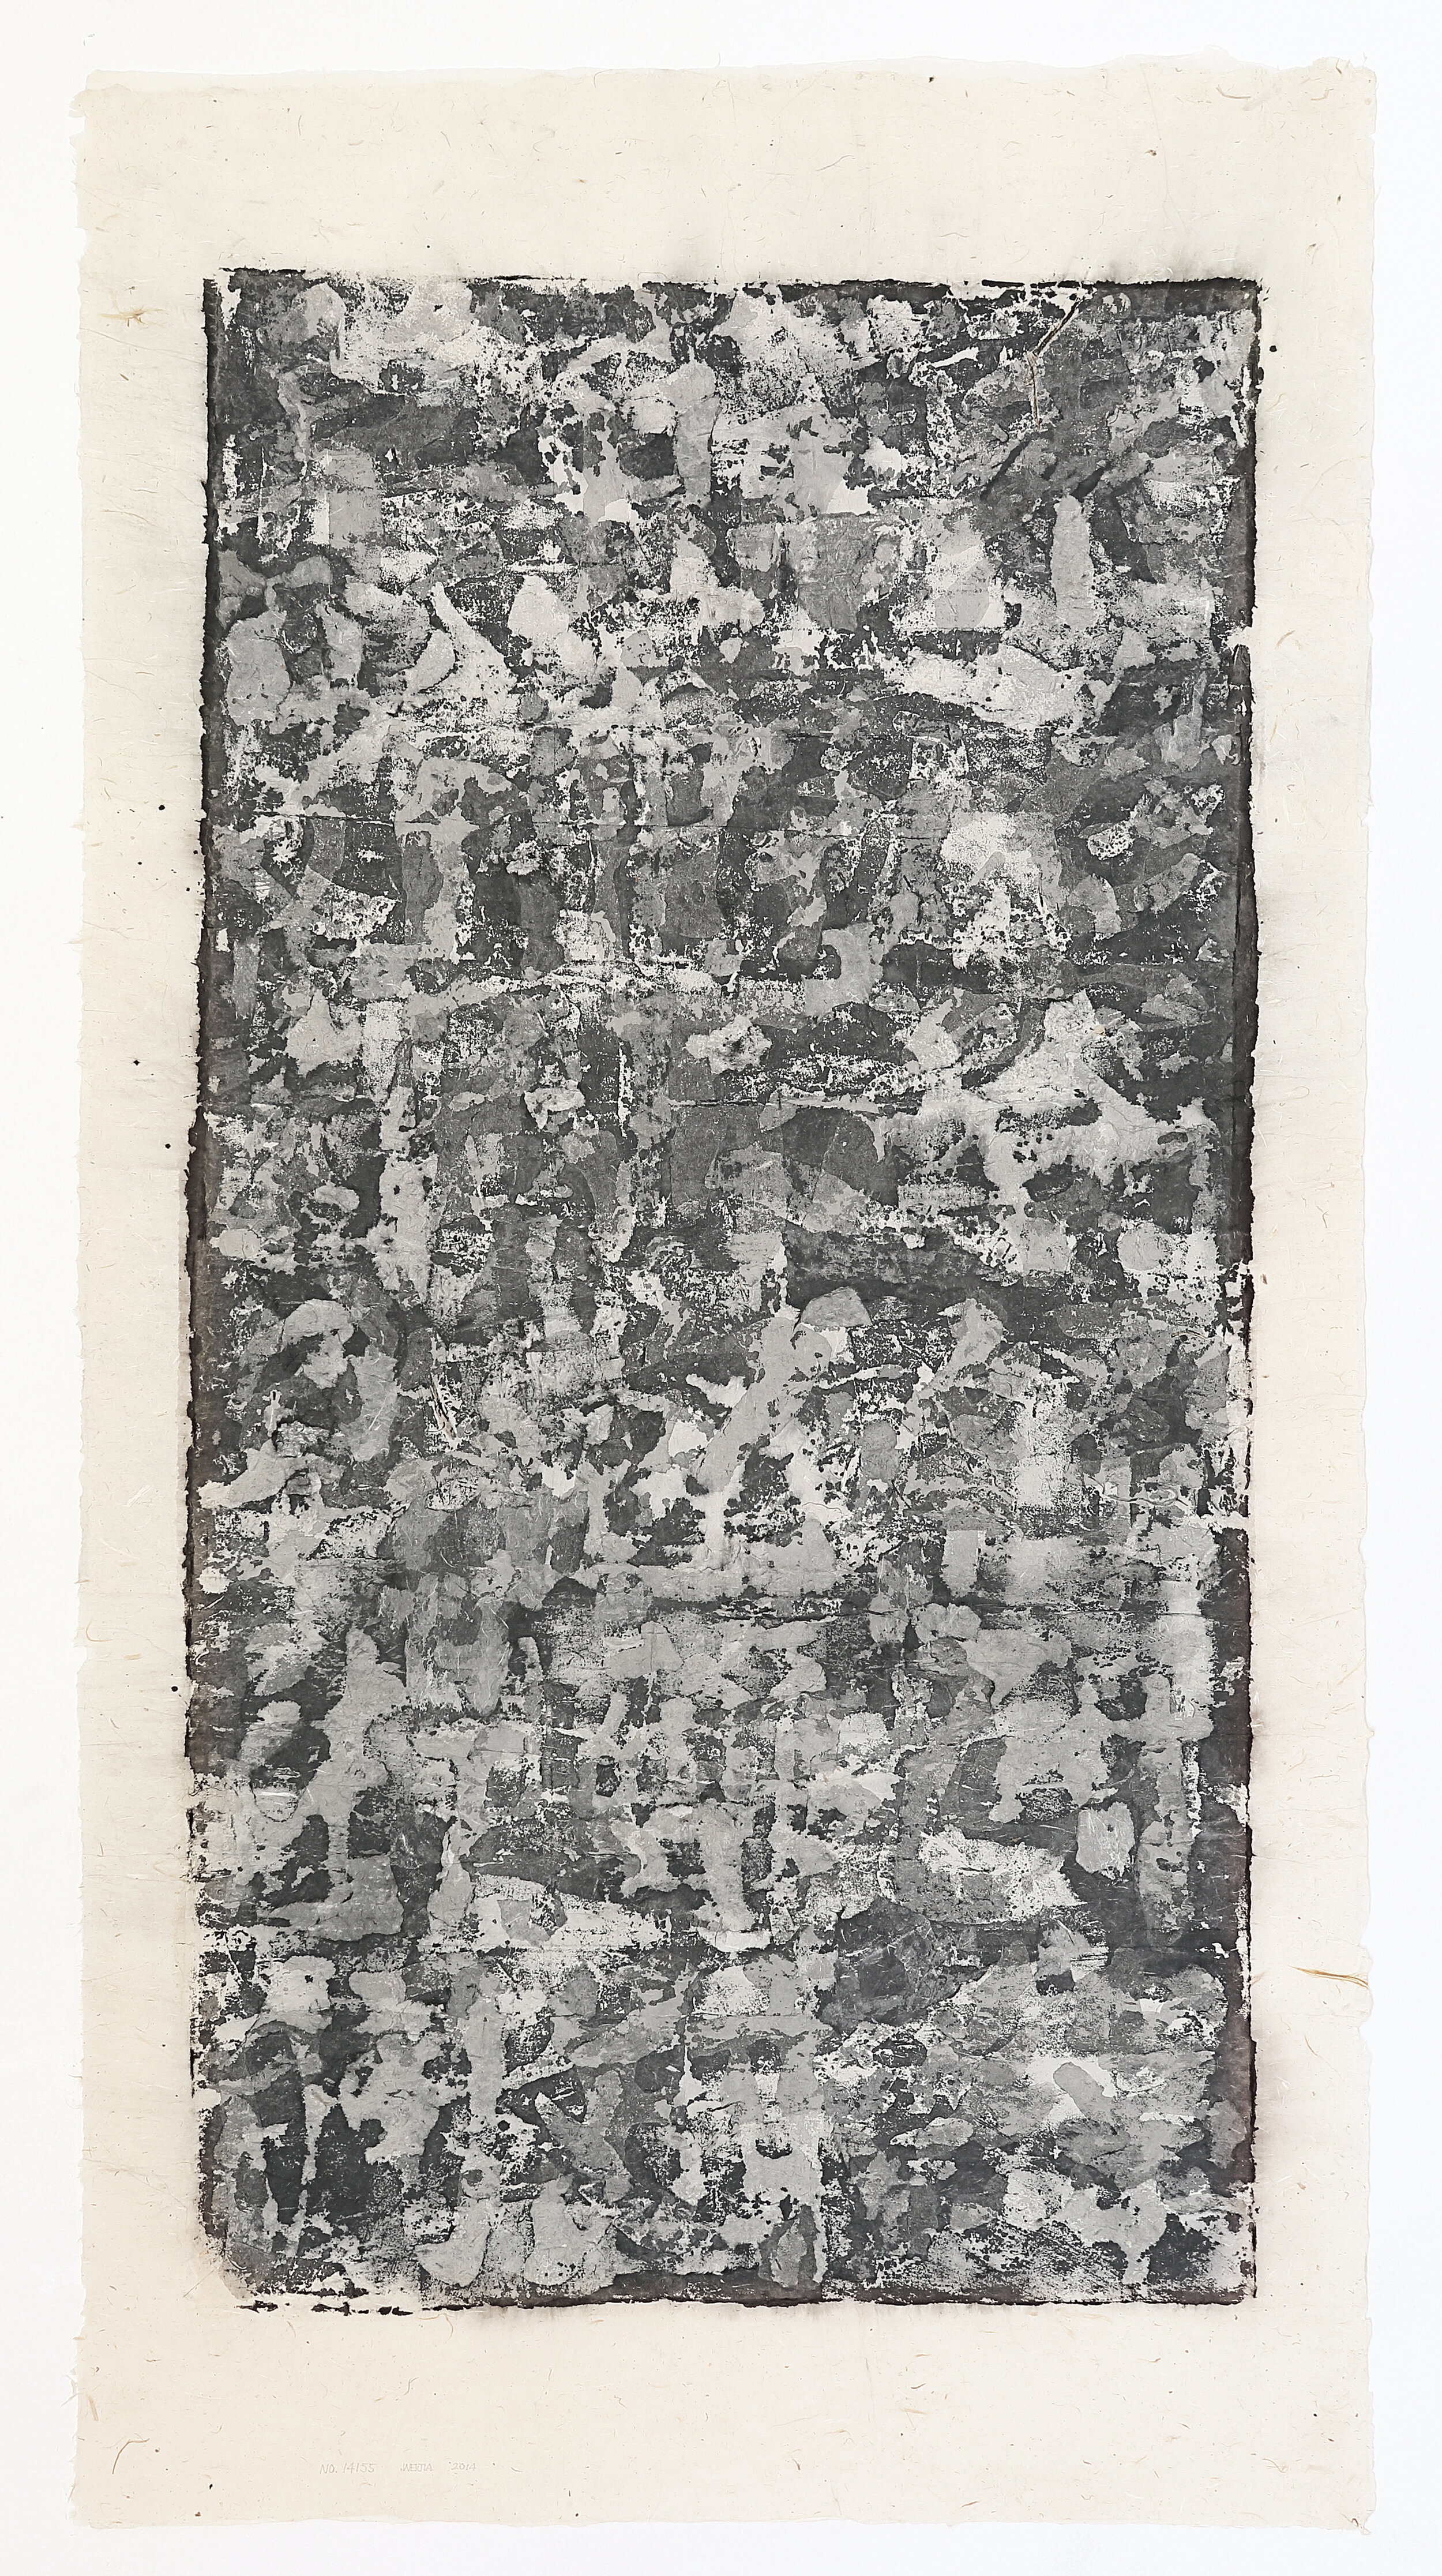  Wei Jia,  No. 14155 , 2014. Gouache, ink and Xuan paper collage on paper, 57 x 29 inches ©Wei Jia, courtesy Fou Gallery   